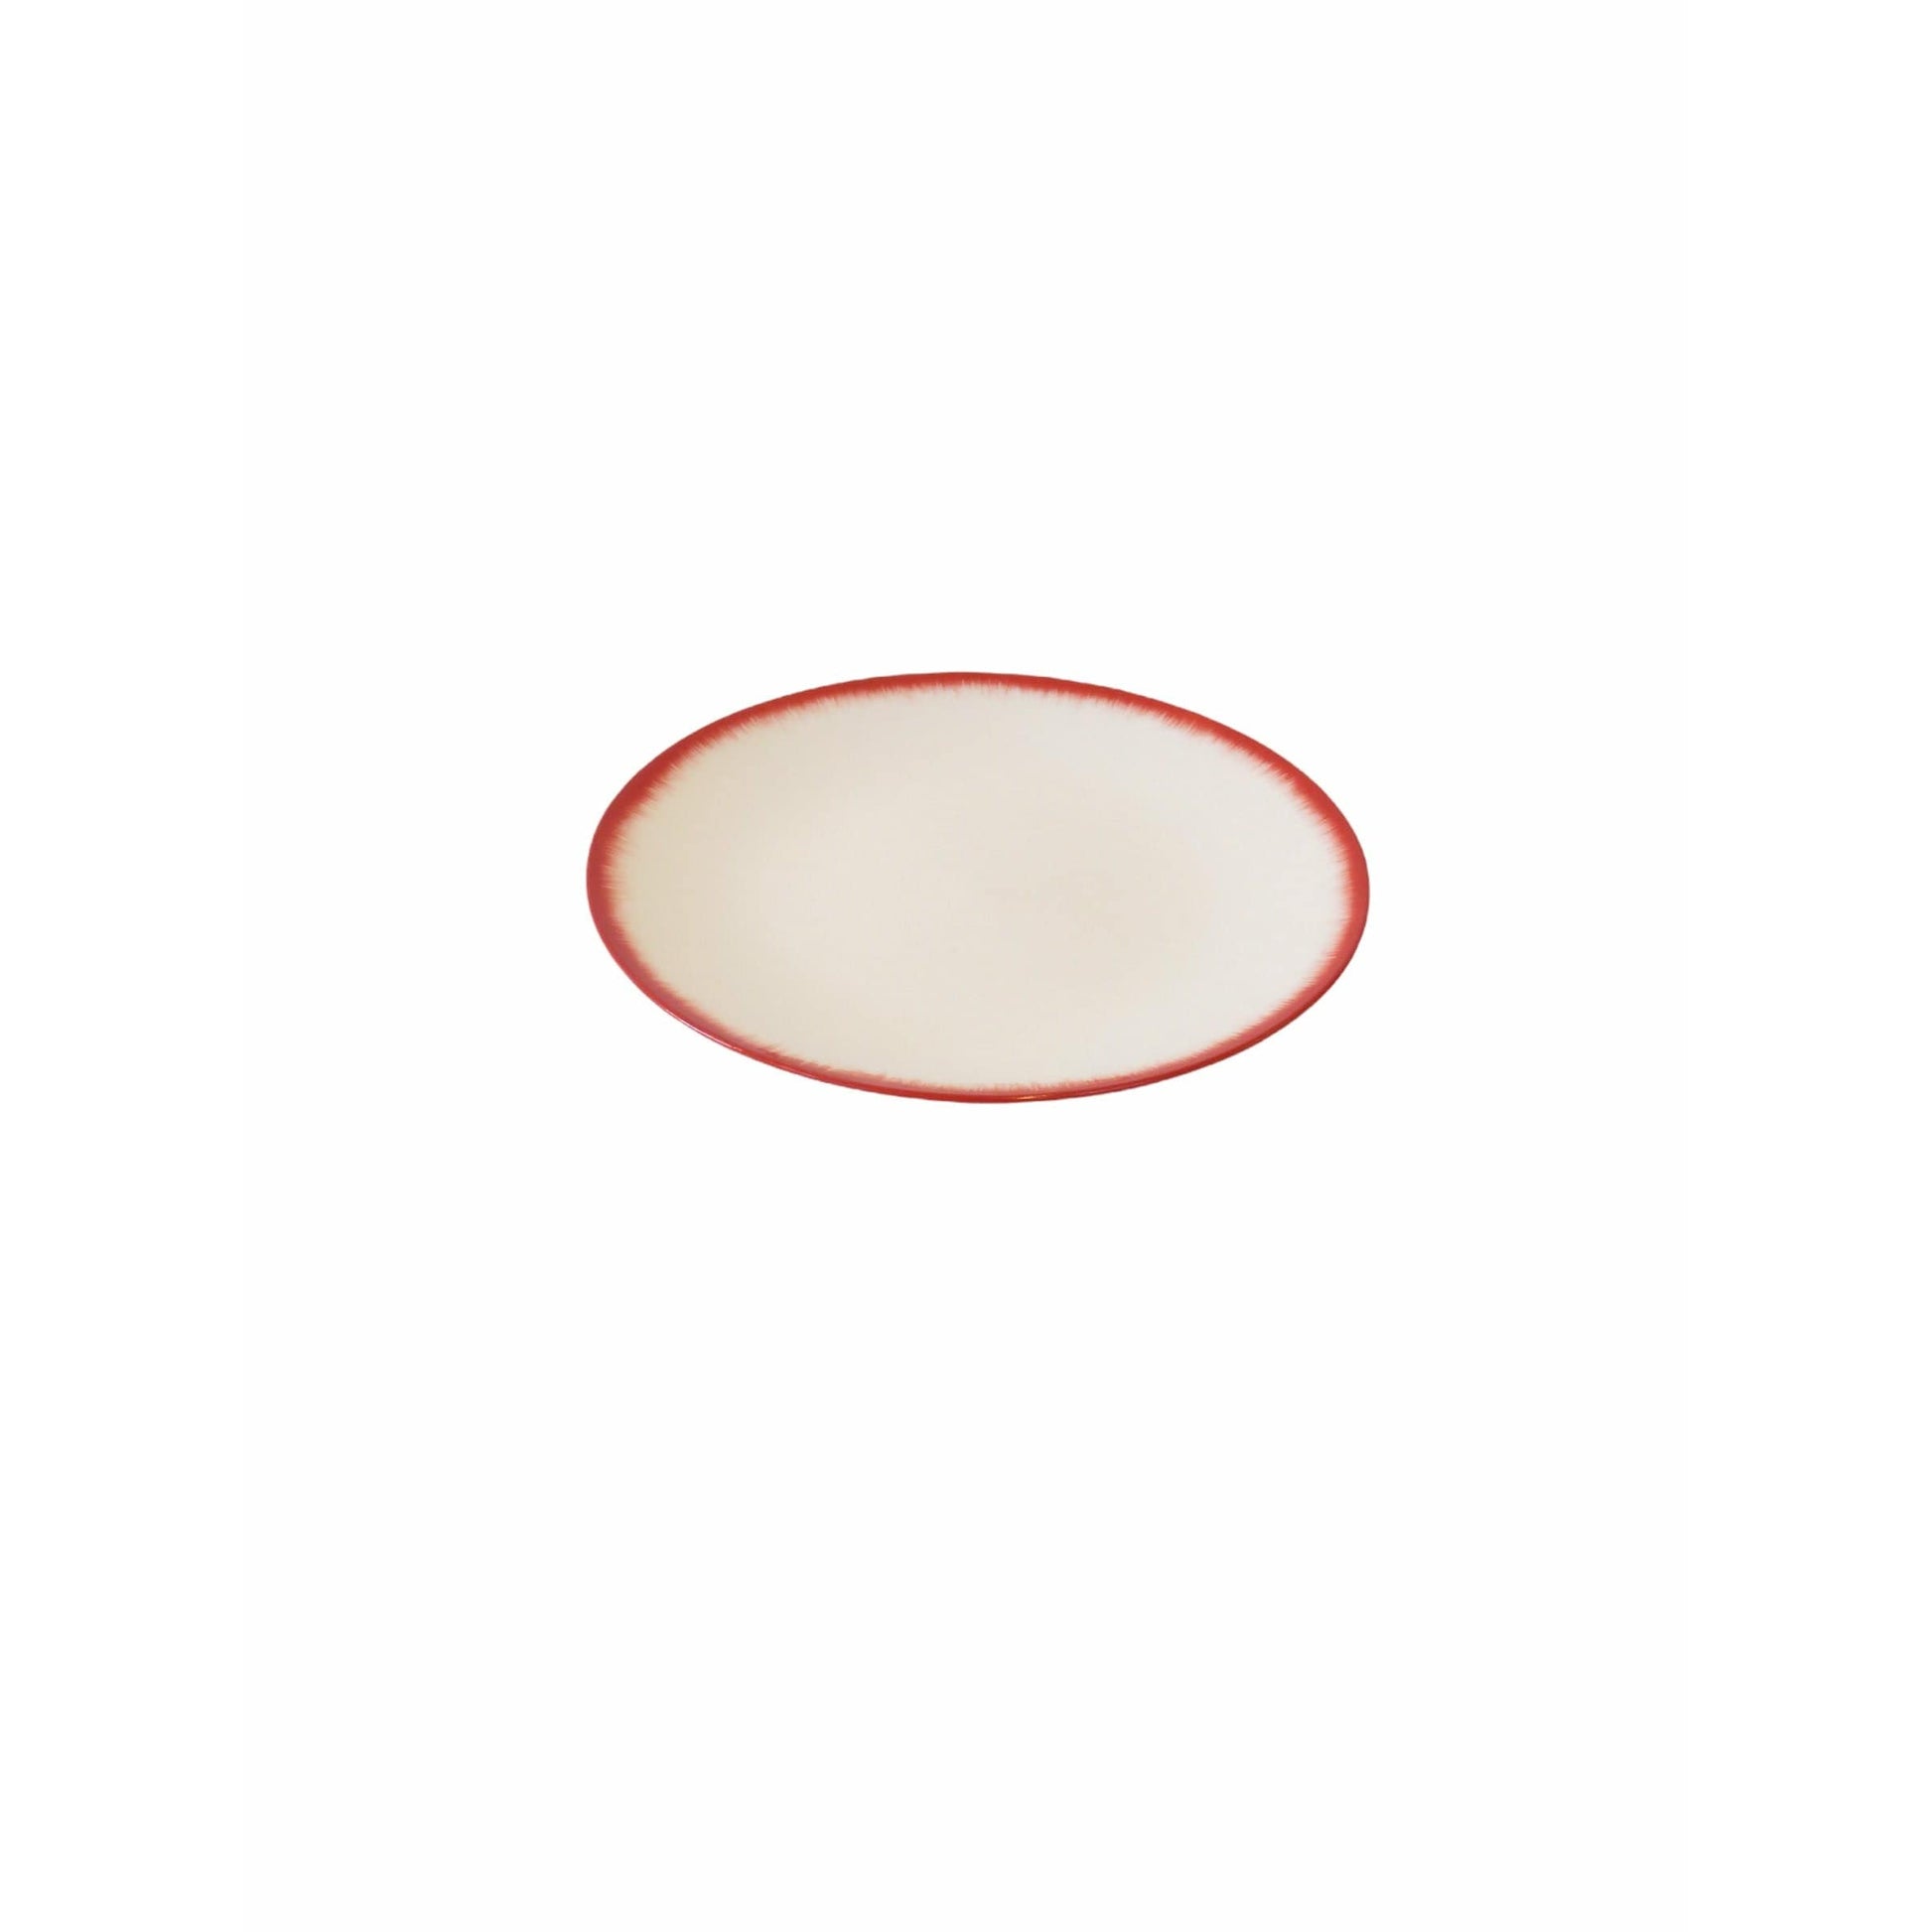 Ann Demeulemeester Home Plate 17.5 centimeters / Off-white & red / Porcelain Ann Demeulemeester for Serax 17.5 cm plates (set of two)